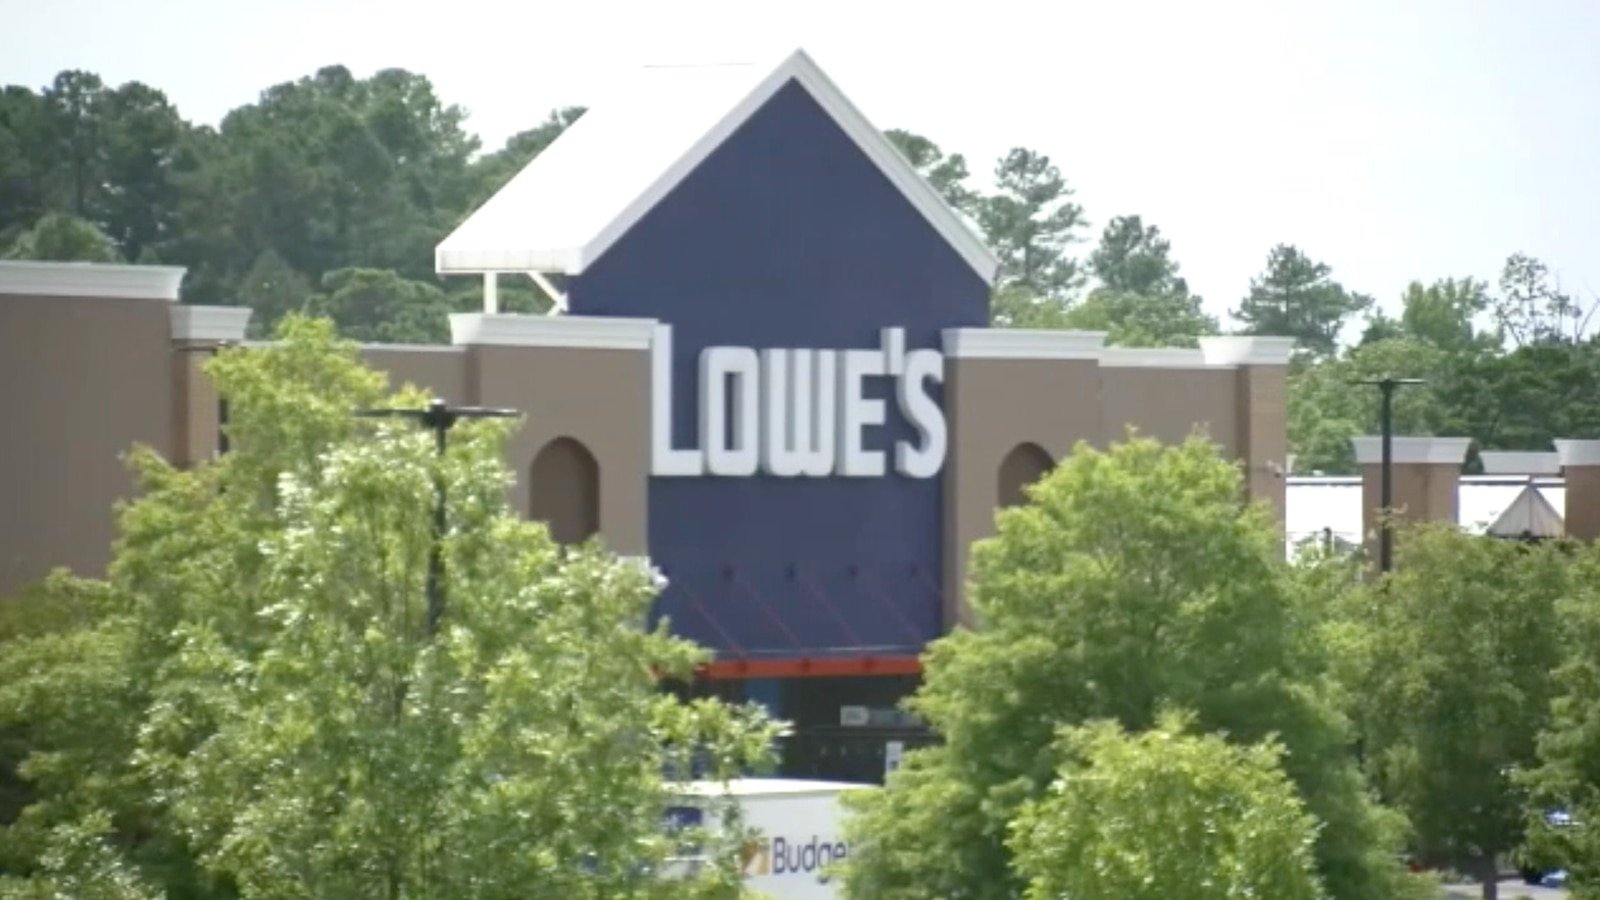 Man arrested after allegedly striking Lowe's employee on head with sledgehammer